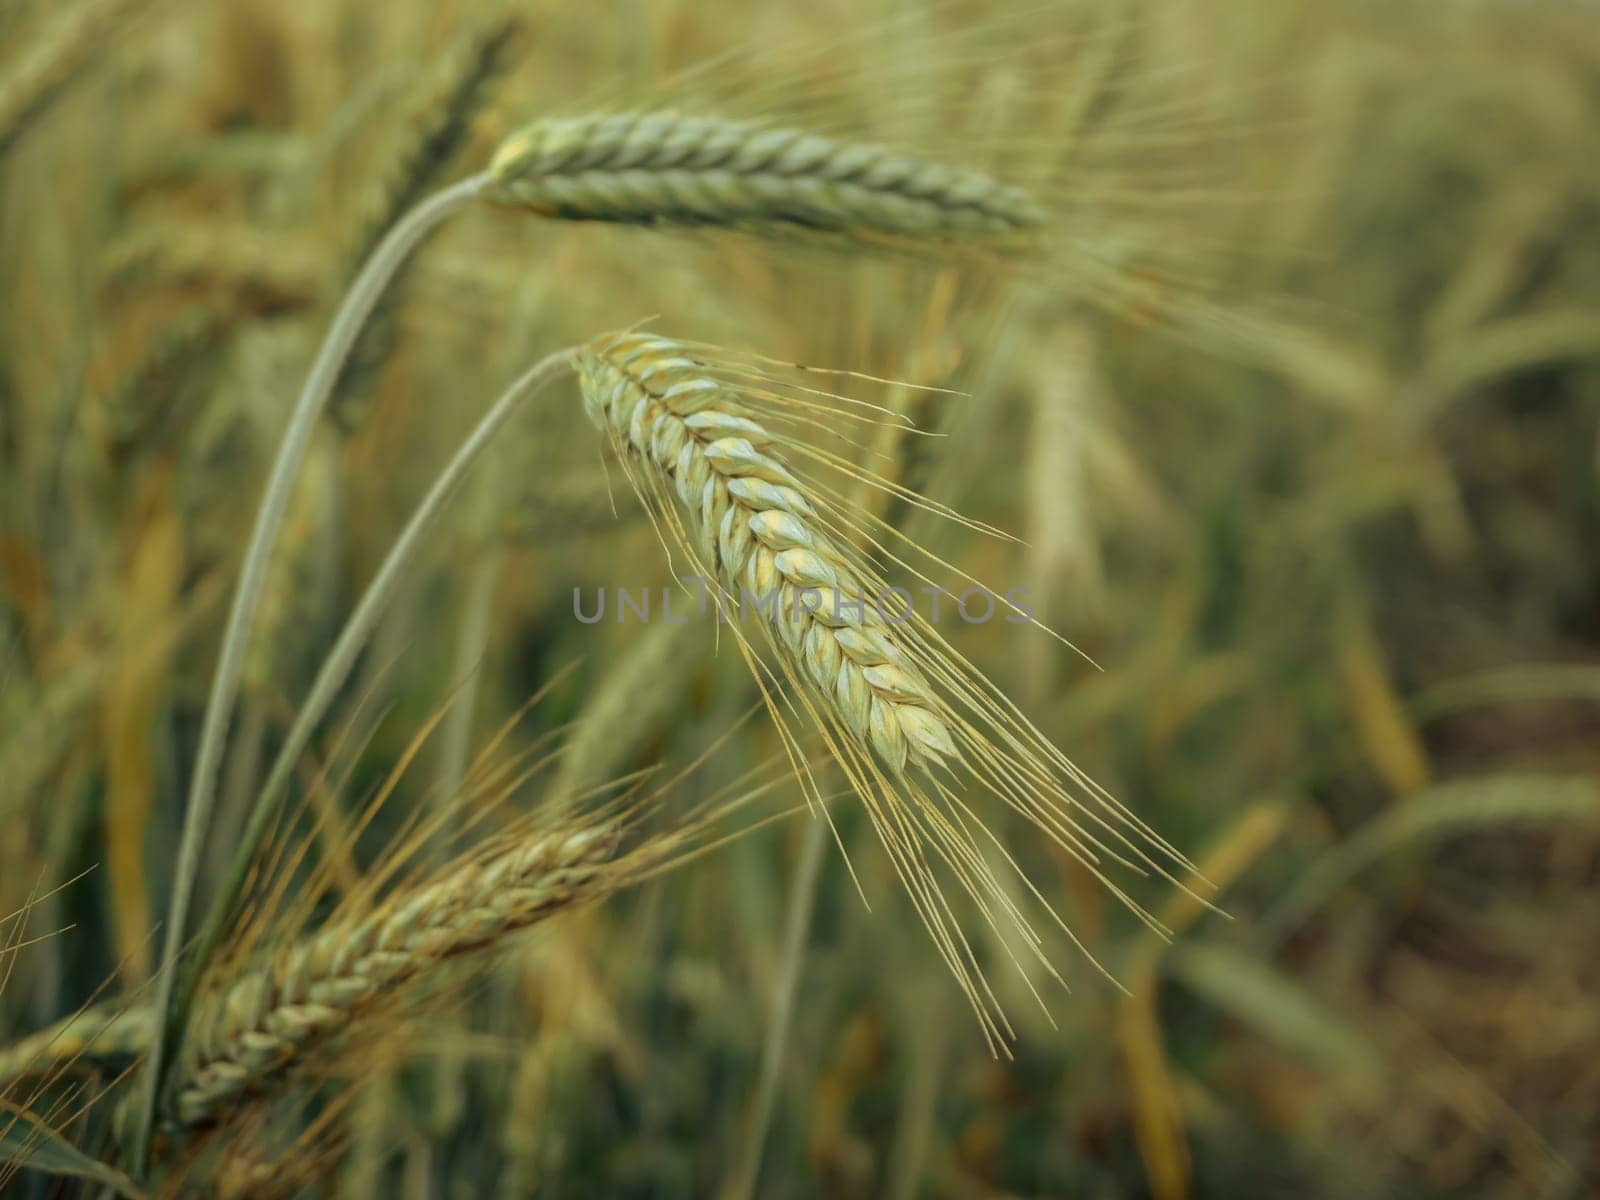 Selective focus with shallow depth of field. Green wheat head in cultivated agricultural field, early stage of farming plant development, retro toned.